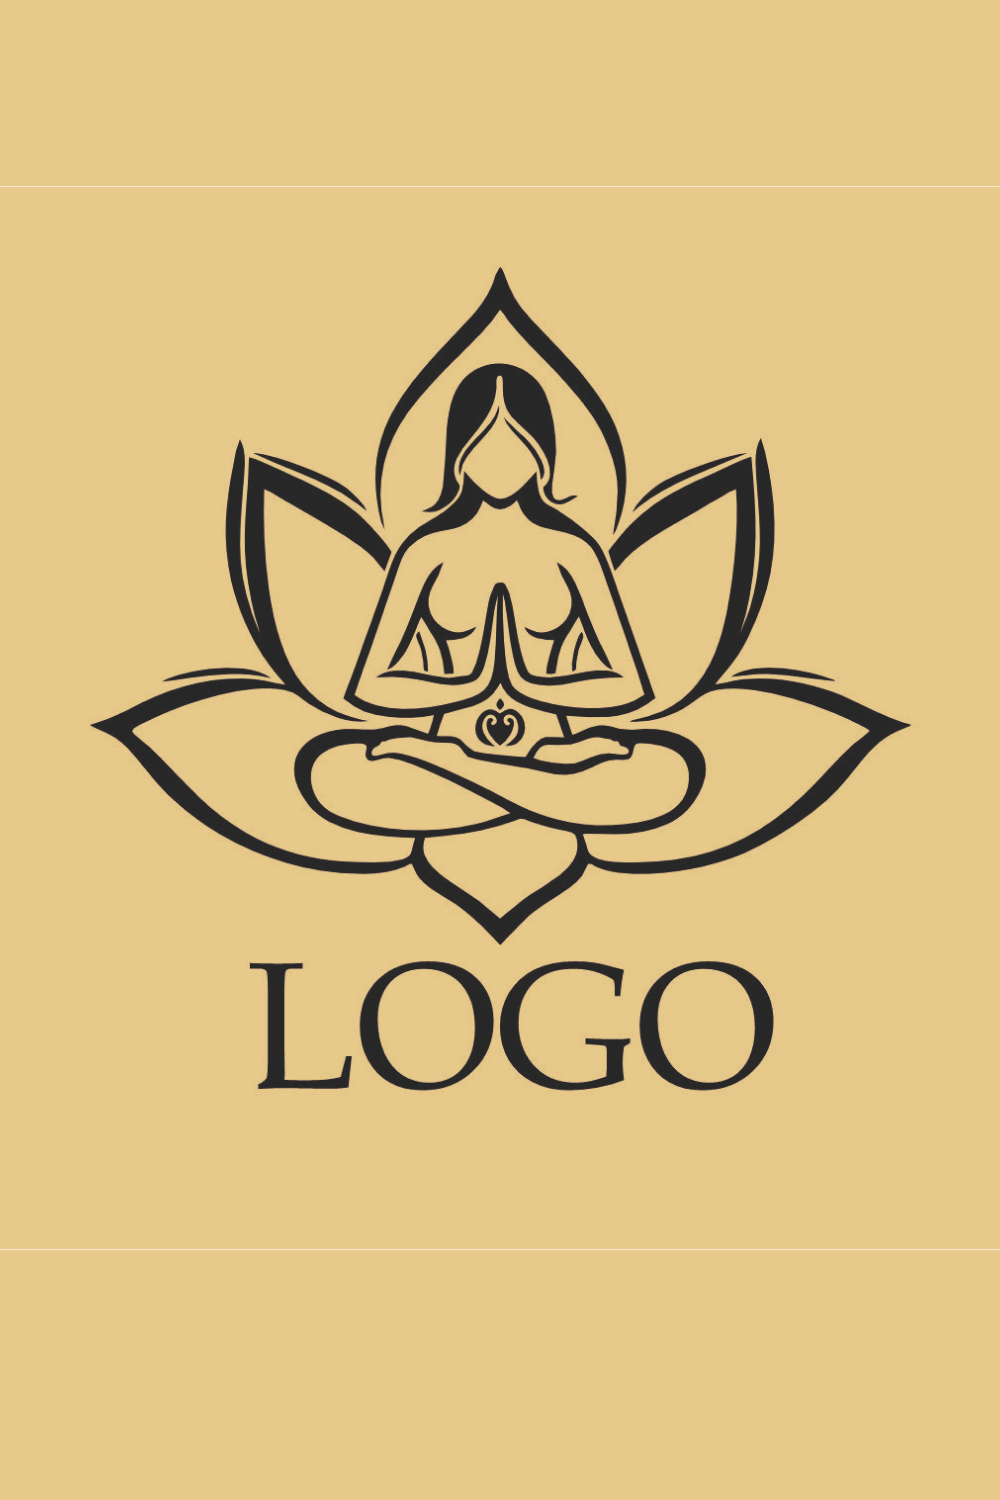 The lotus and the woman logo pinterest preview image.